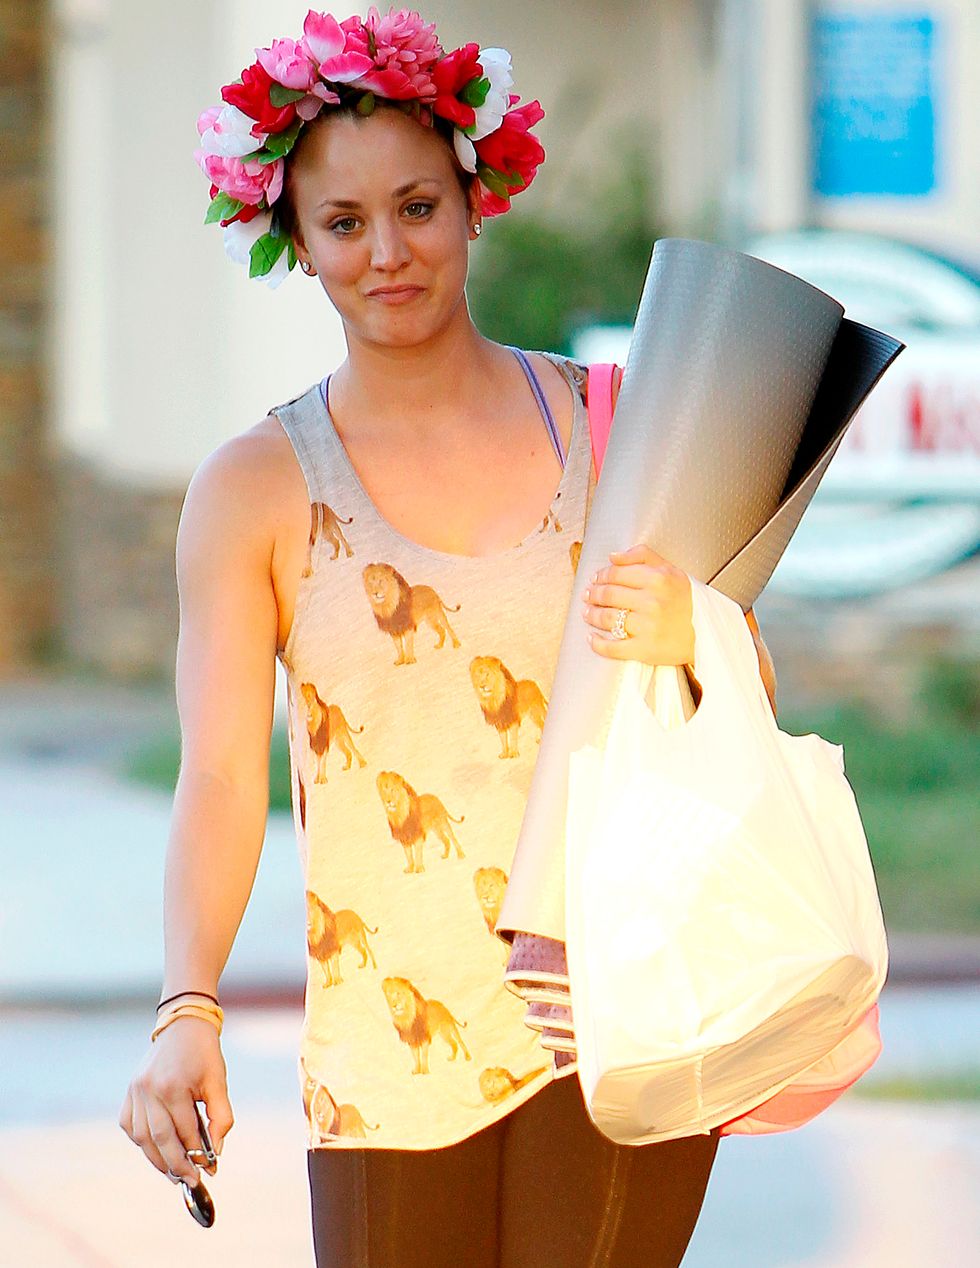 Kaley Cuoco wears floral headband out and about - celebrity style photos - fashion - cosmopolitan.co.uk